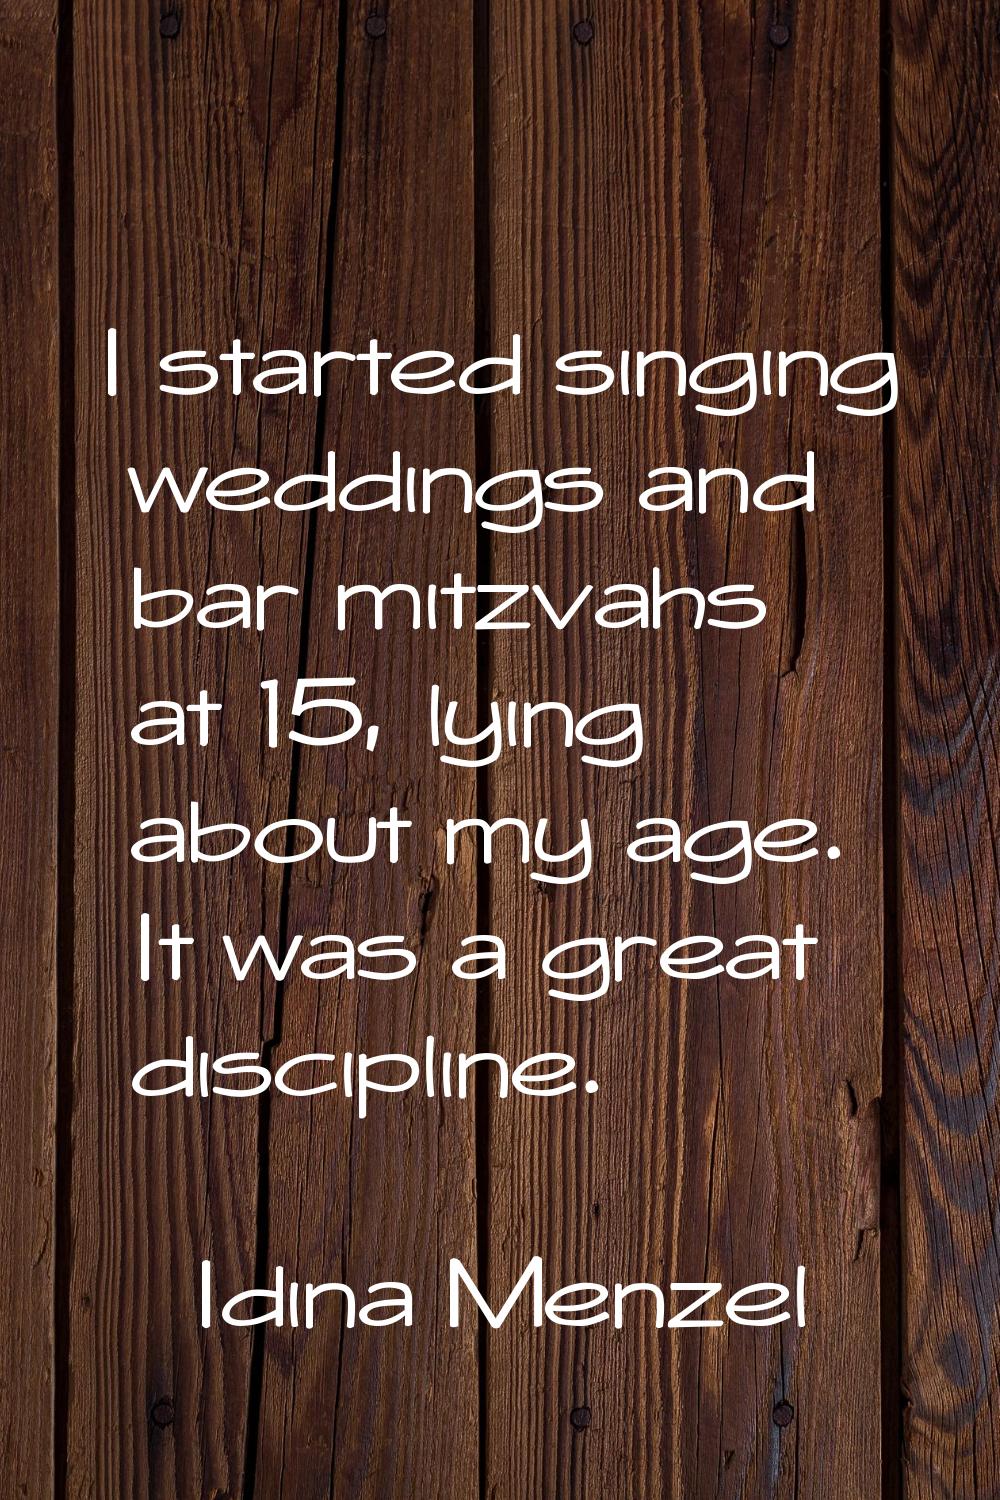 I started singing weddings and bar mitzvahs at 15, lying about my age. It was a great discipline.